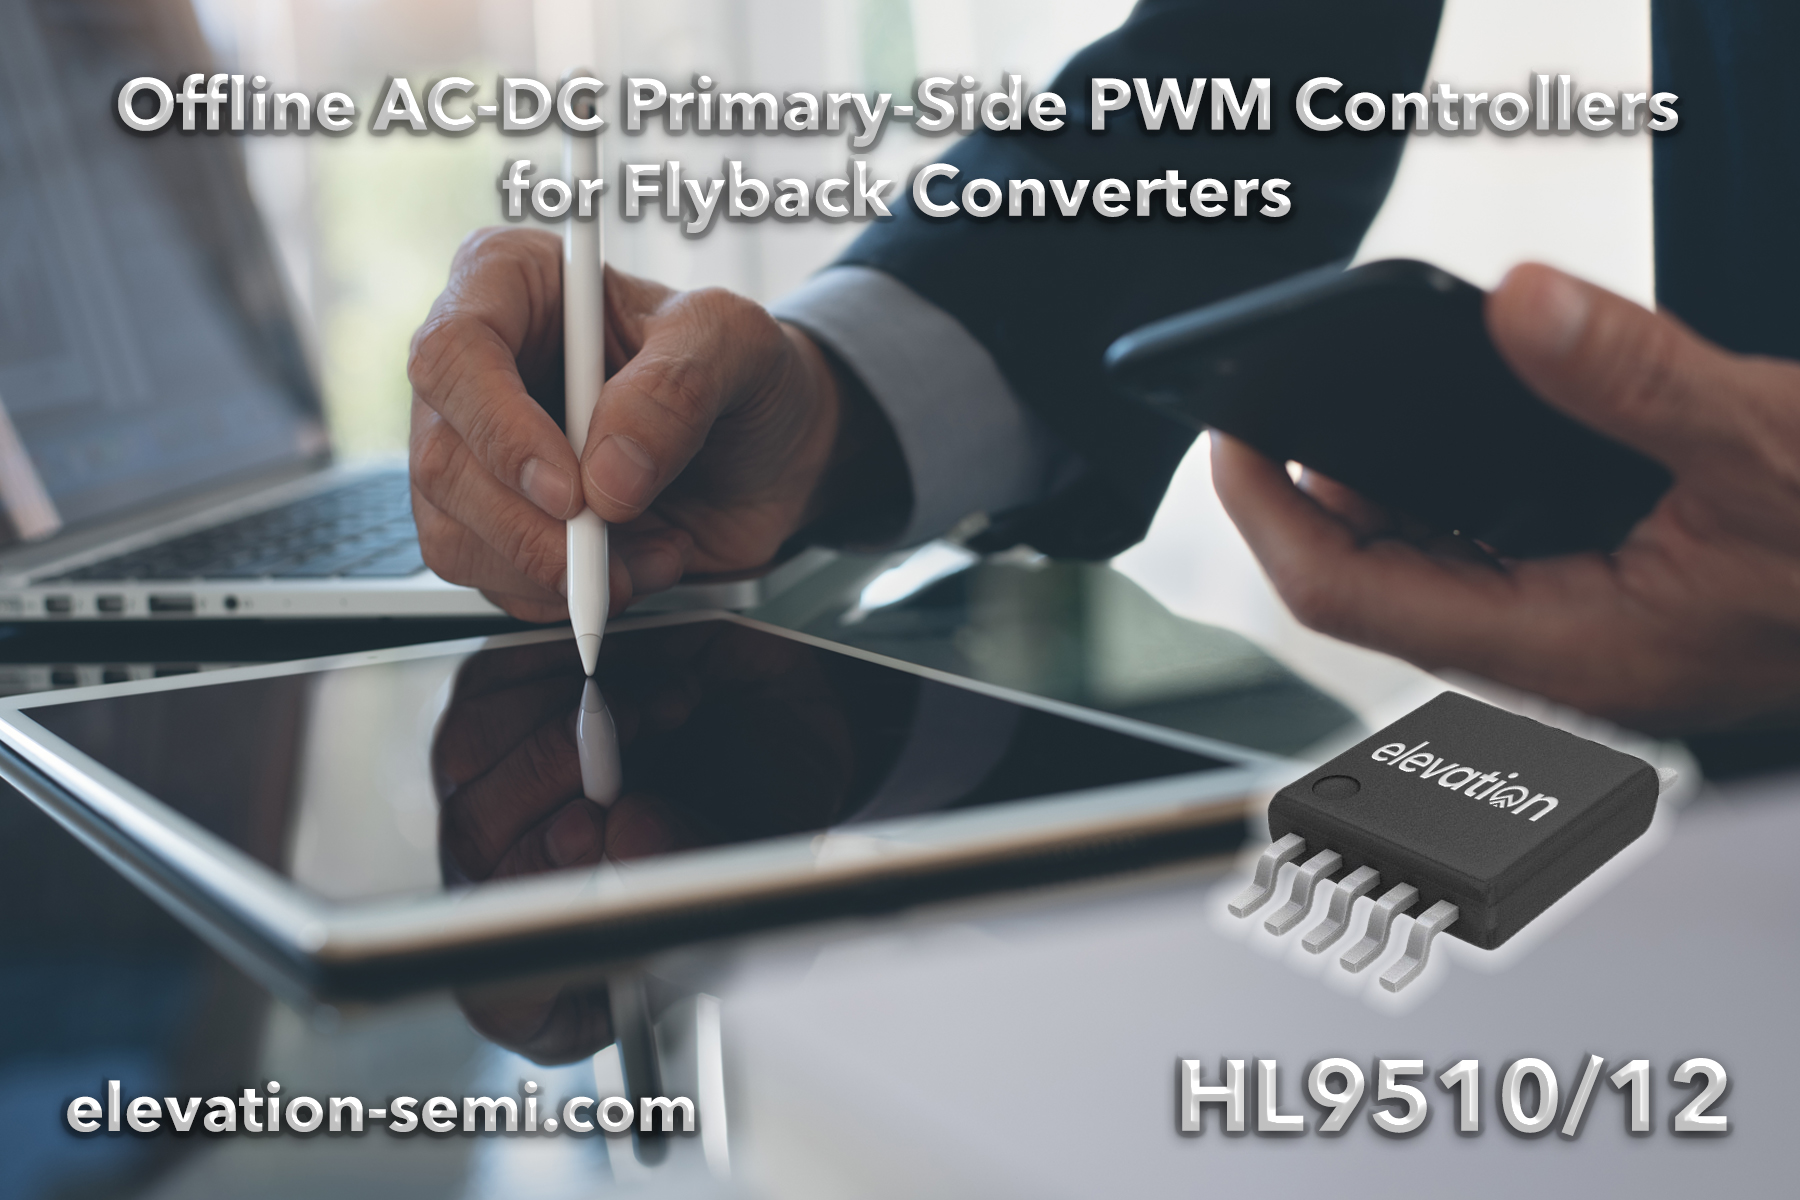 Offline AC-DC Primary-Side PWM Controllers for Flyback Converters